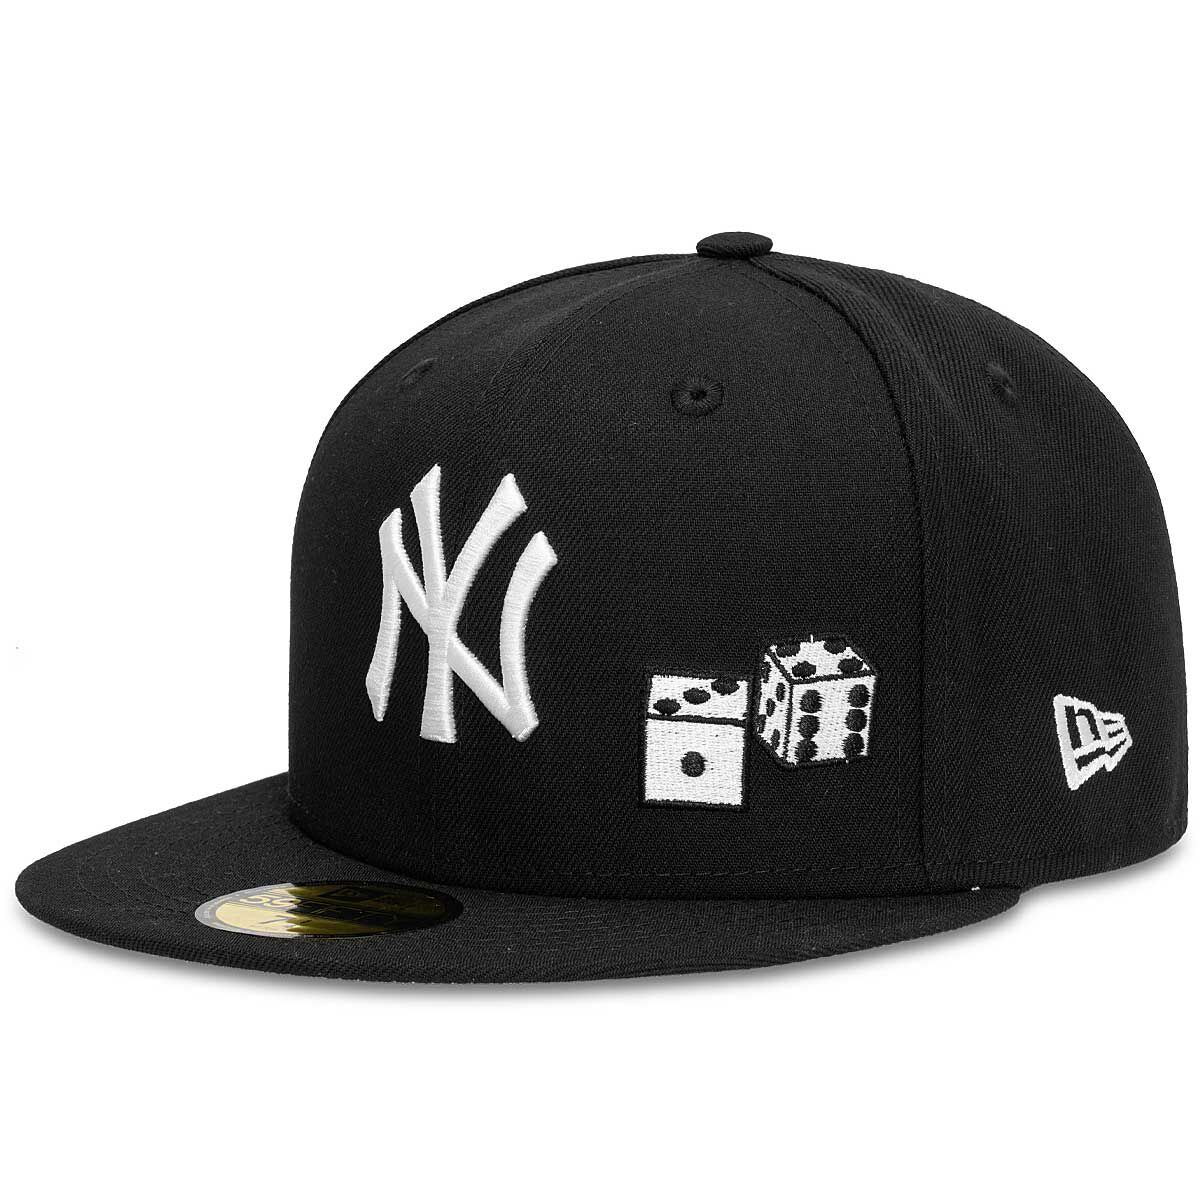 New Era for you: order online and easy | KICKZ